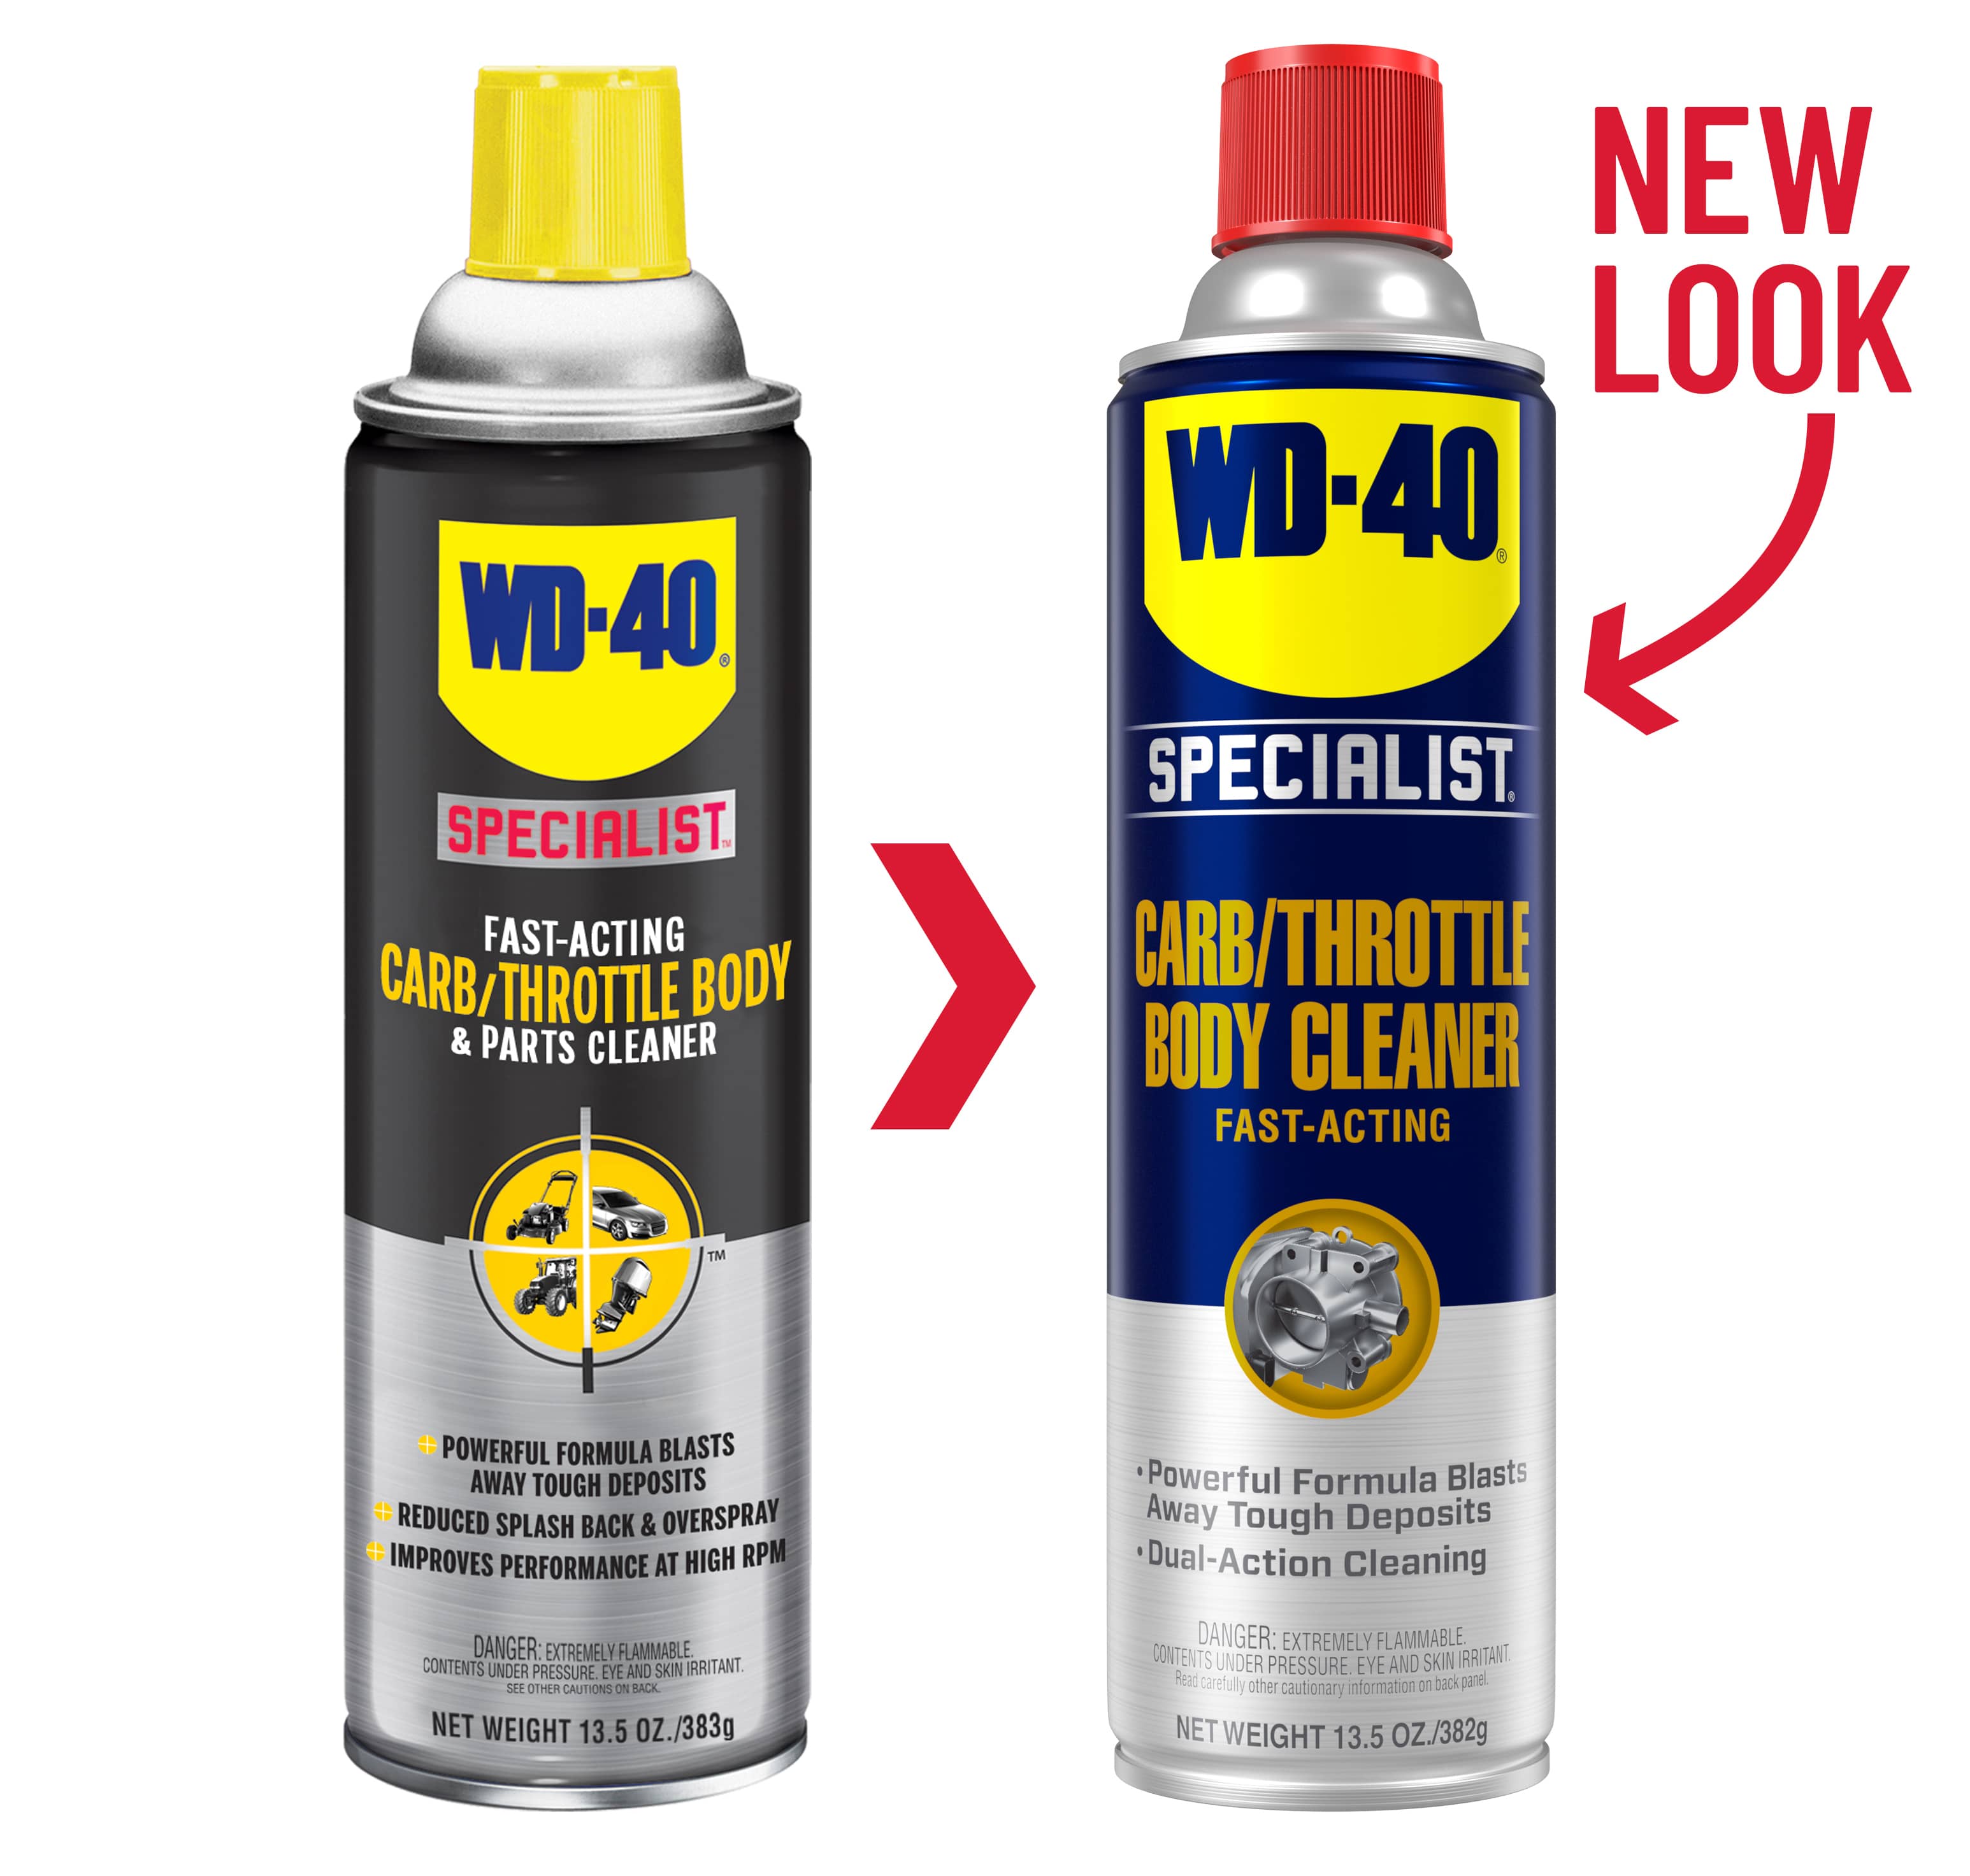 Can You Use Wd40 to Clean a Carburetor?